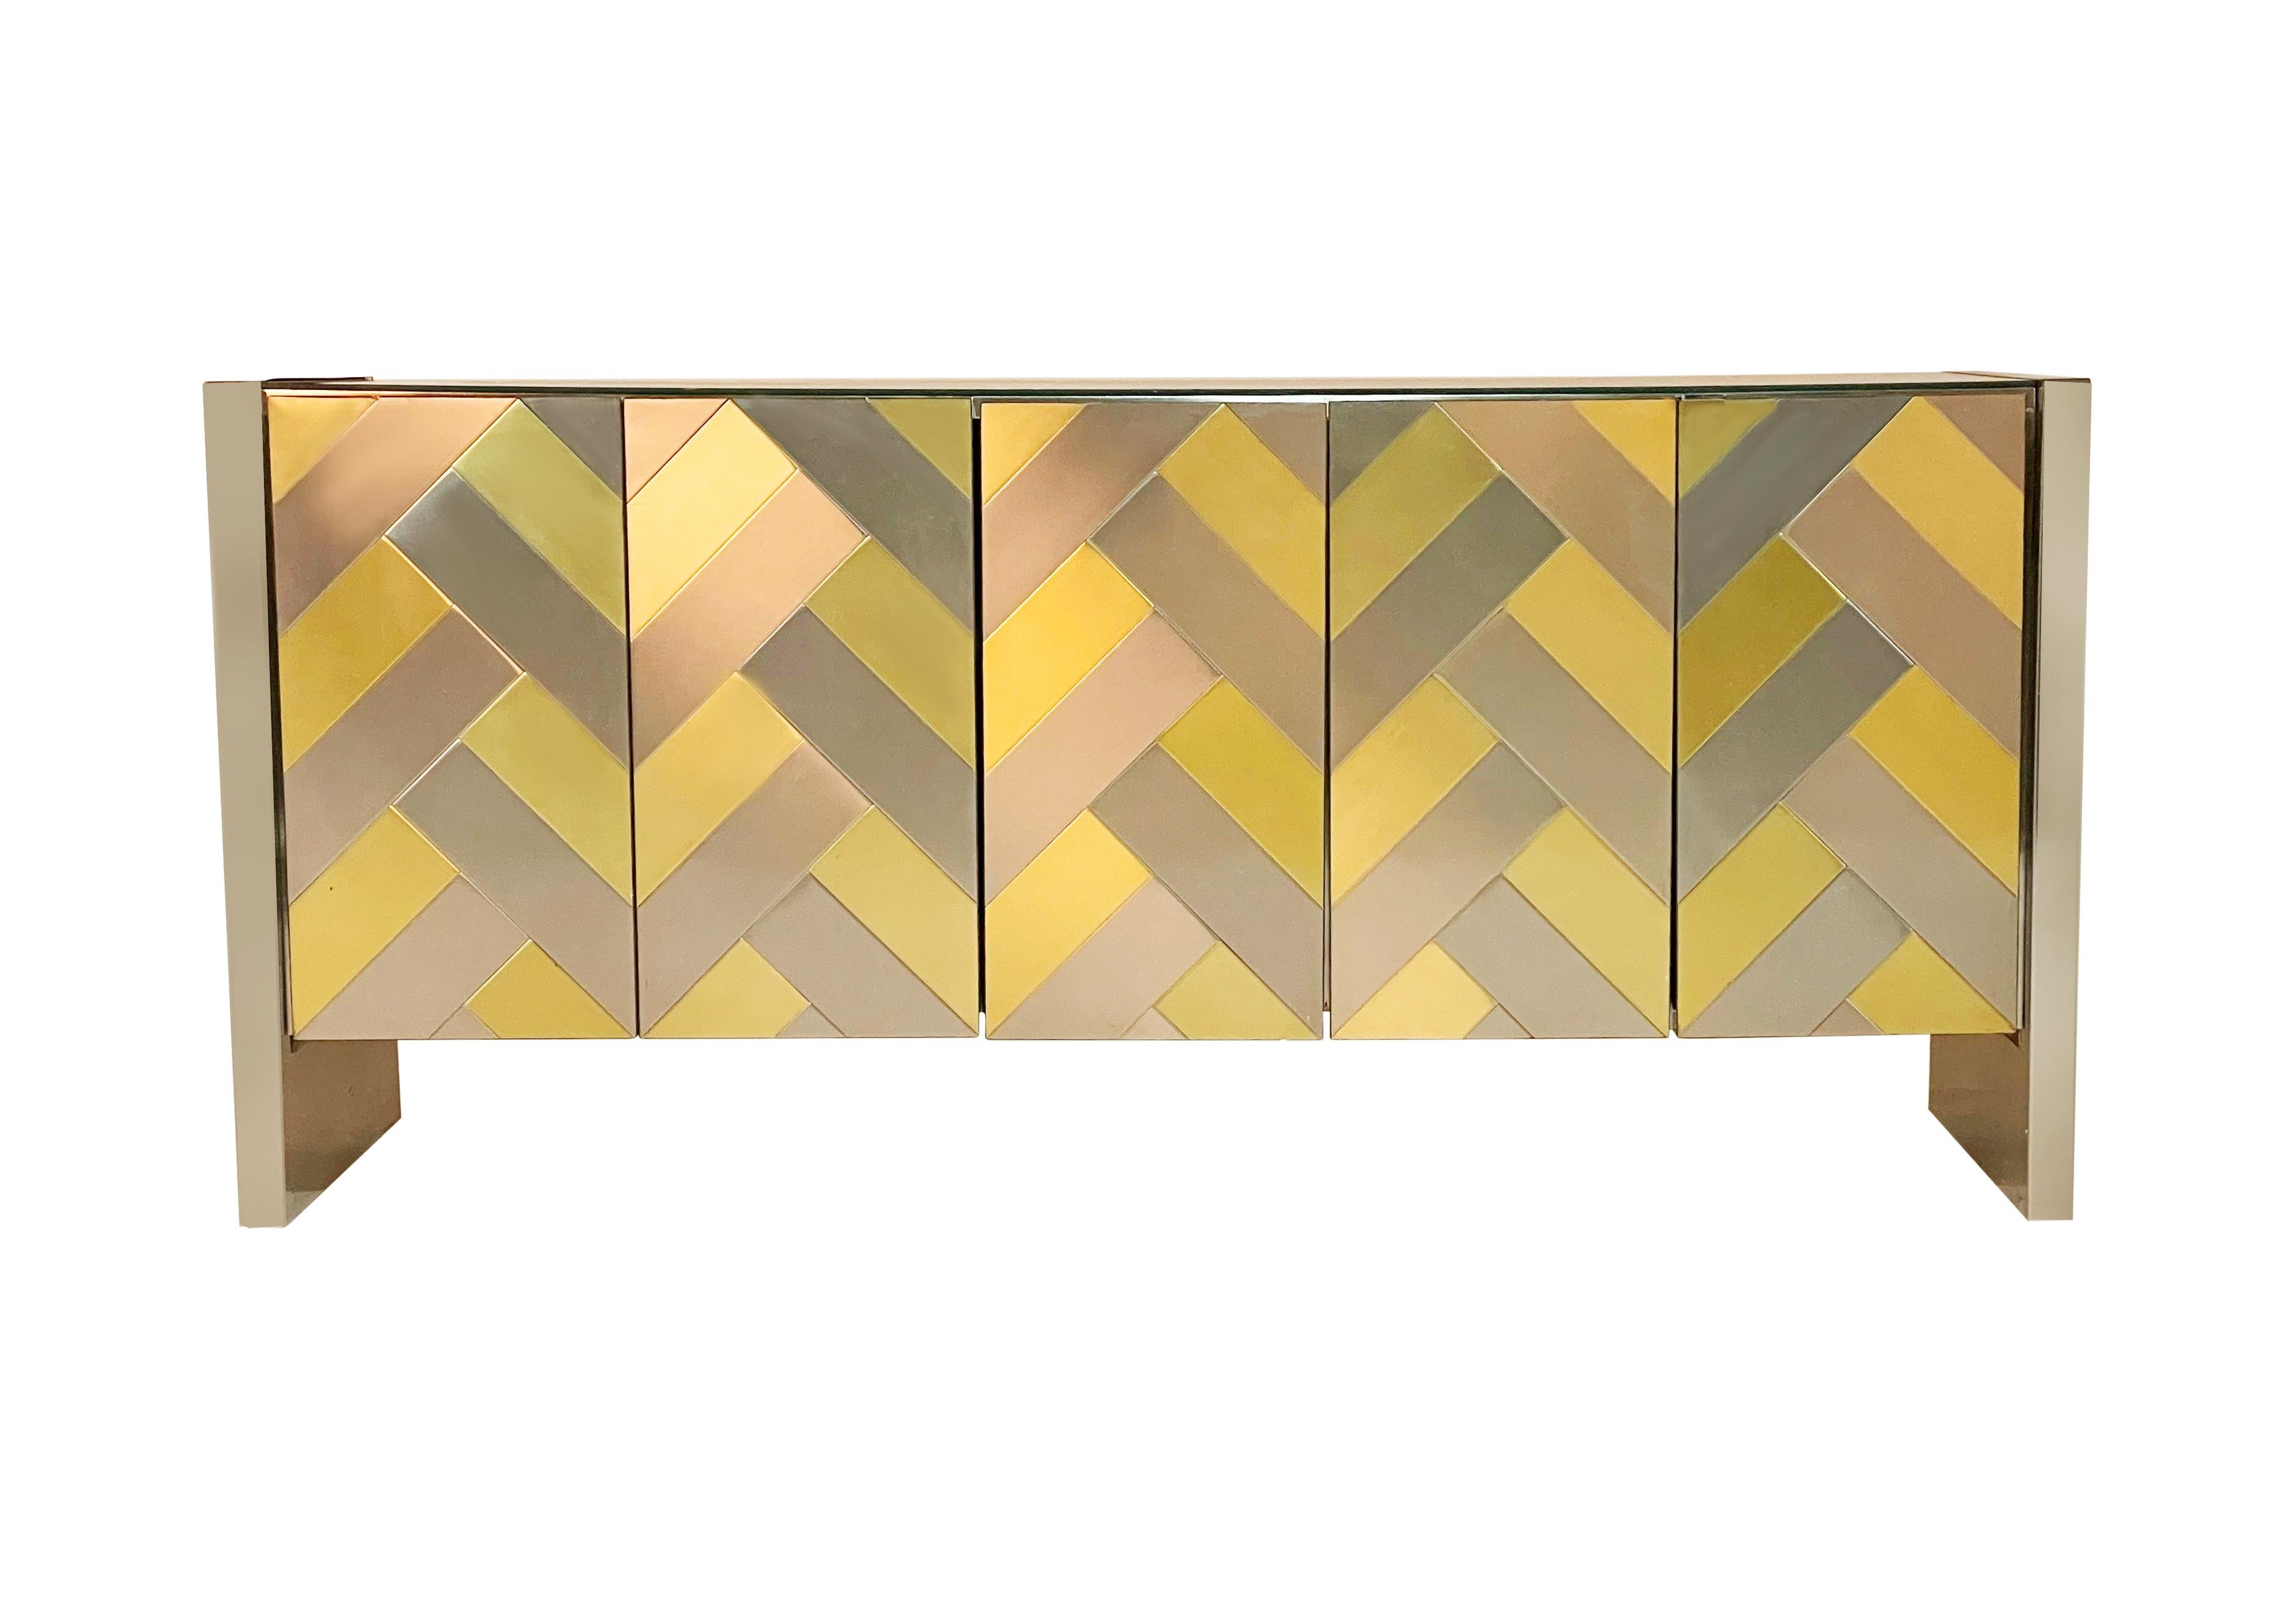 American Mid-Century Modern Brass & Brushed Steel Herringbone Credenza or Cabinet by Ello For Sale